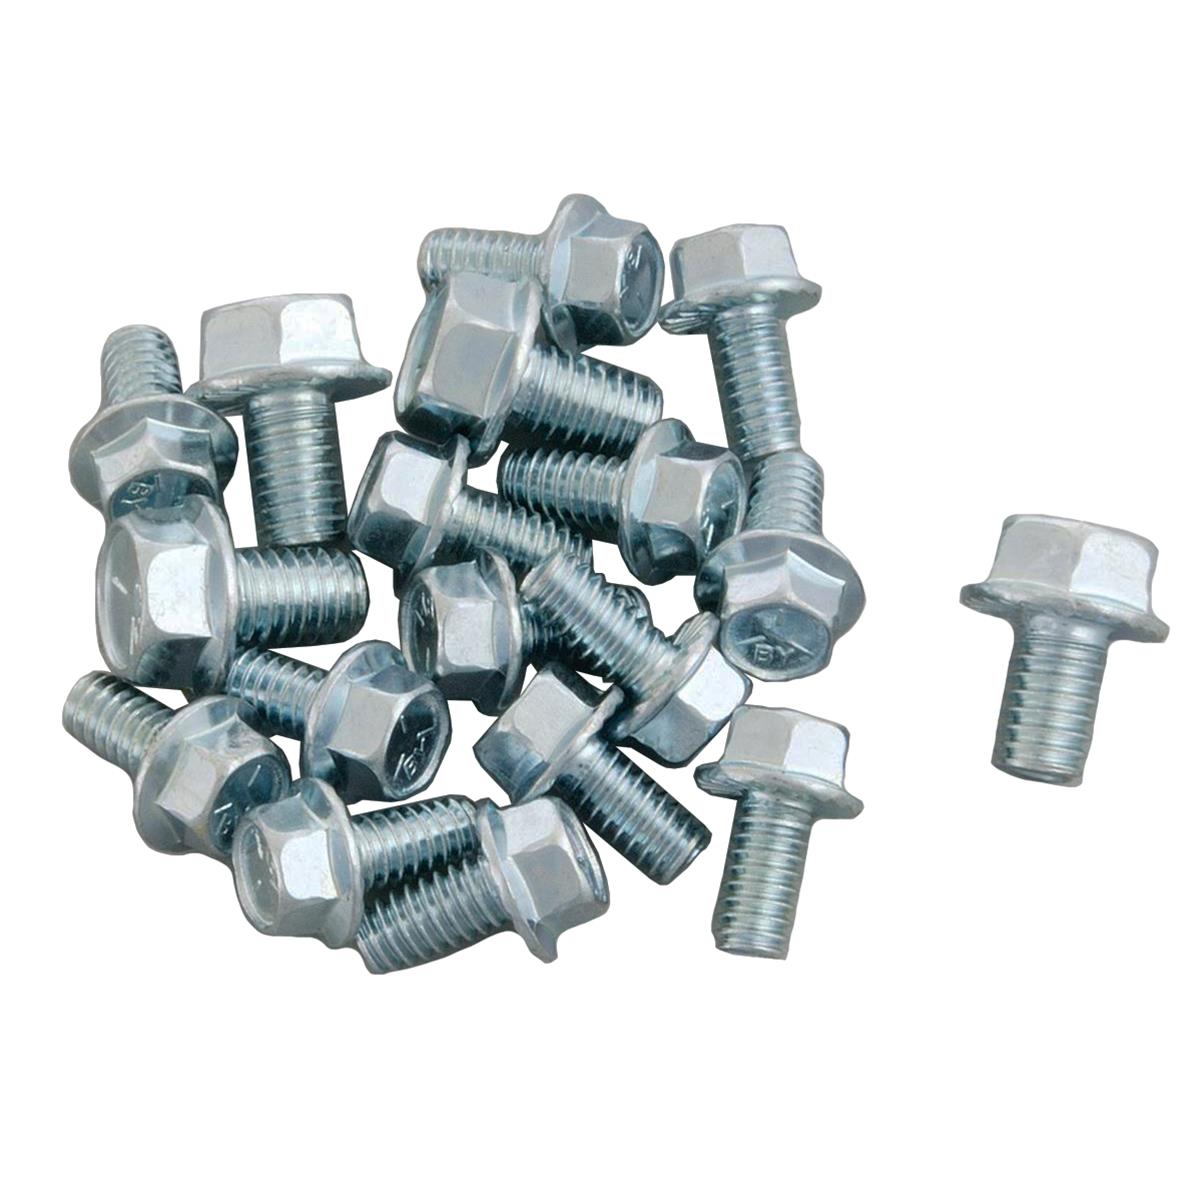 Milodon 1/4-20 X 1/2 Bolts - 10 Pack 85250